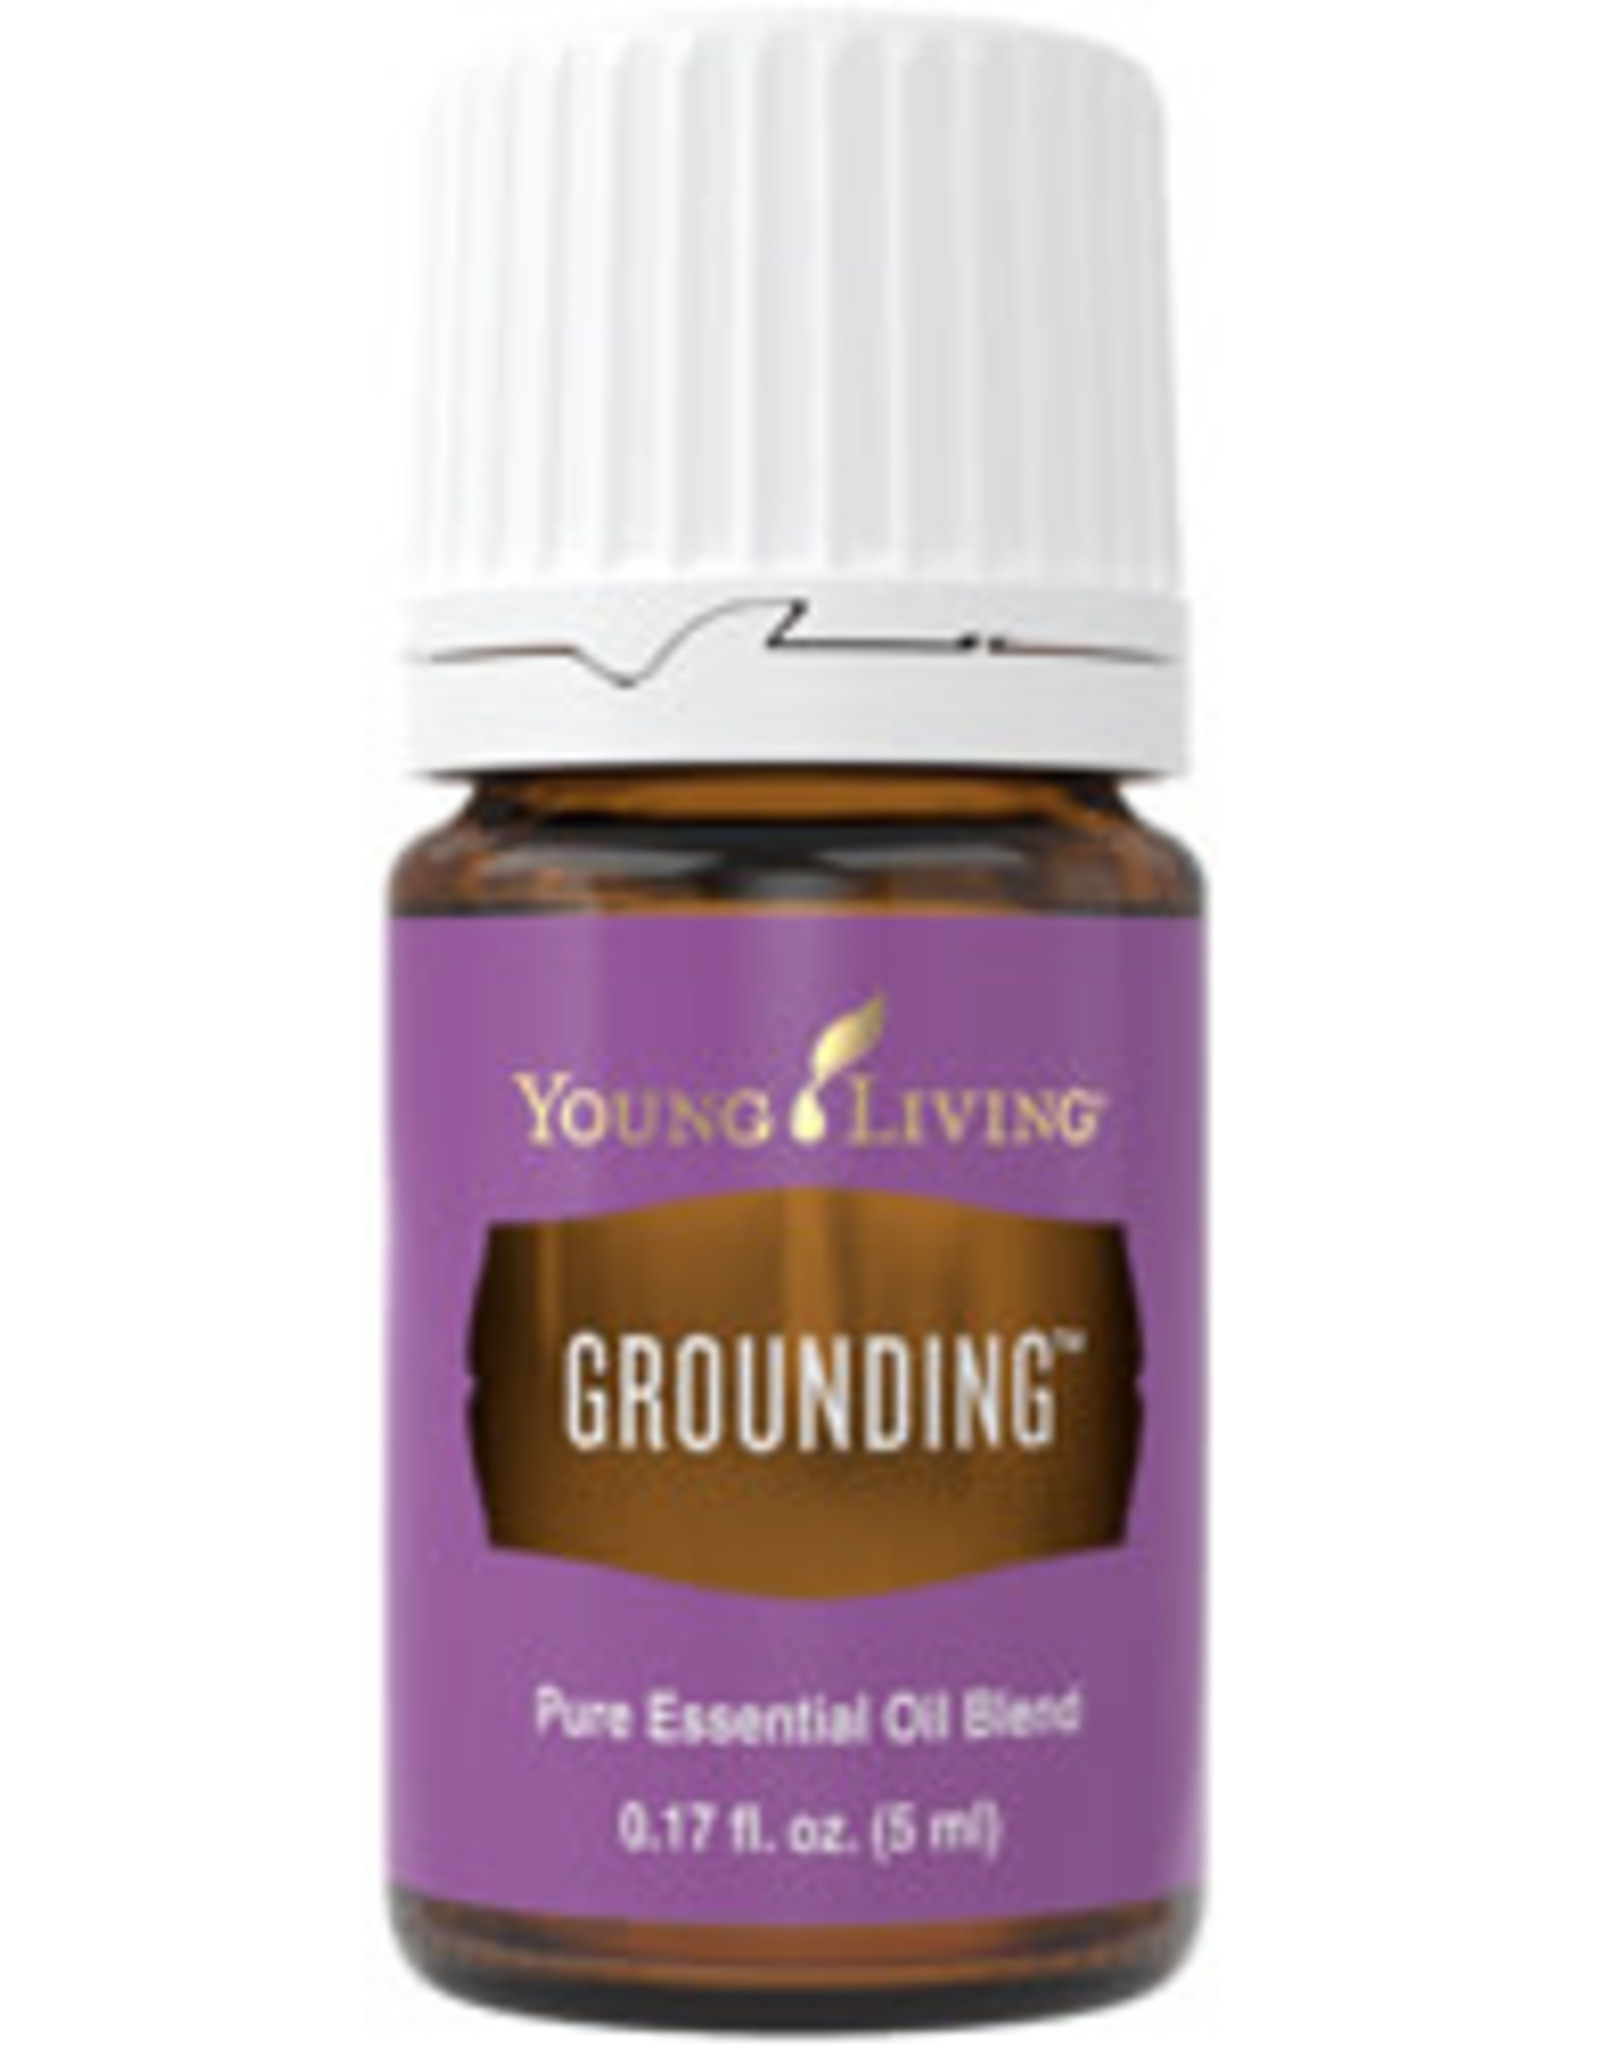 Young Living Grounding Oil Blend